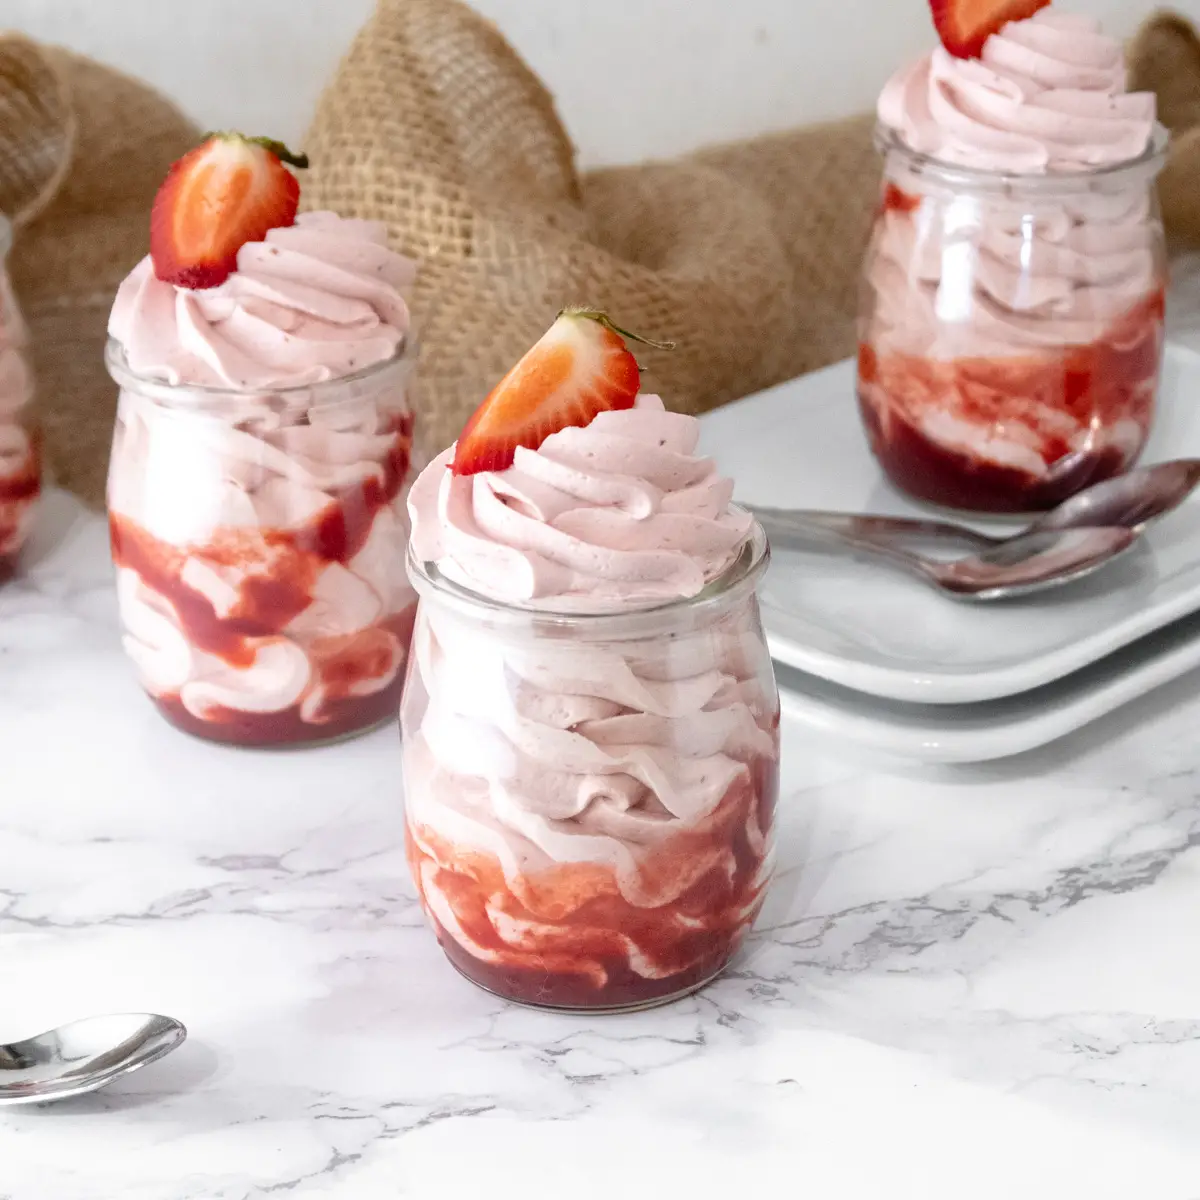 Vegan white chocolate and strawberry mousse pipped into jars that are resting on plates.